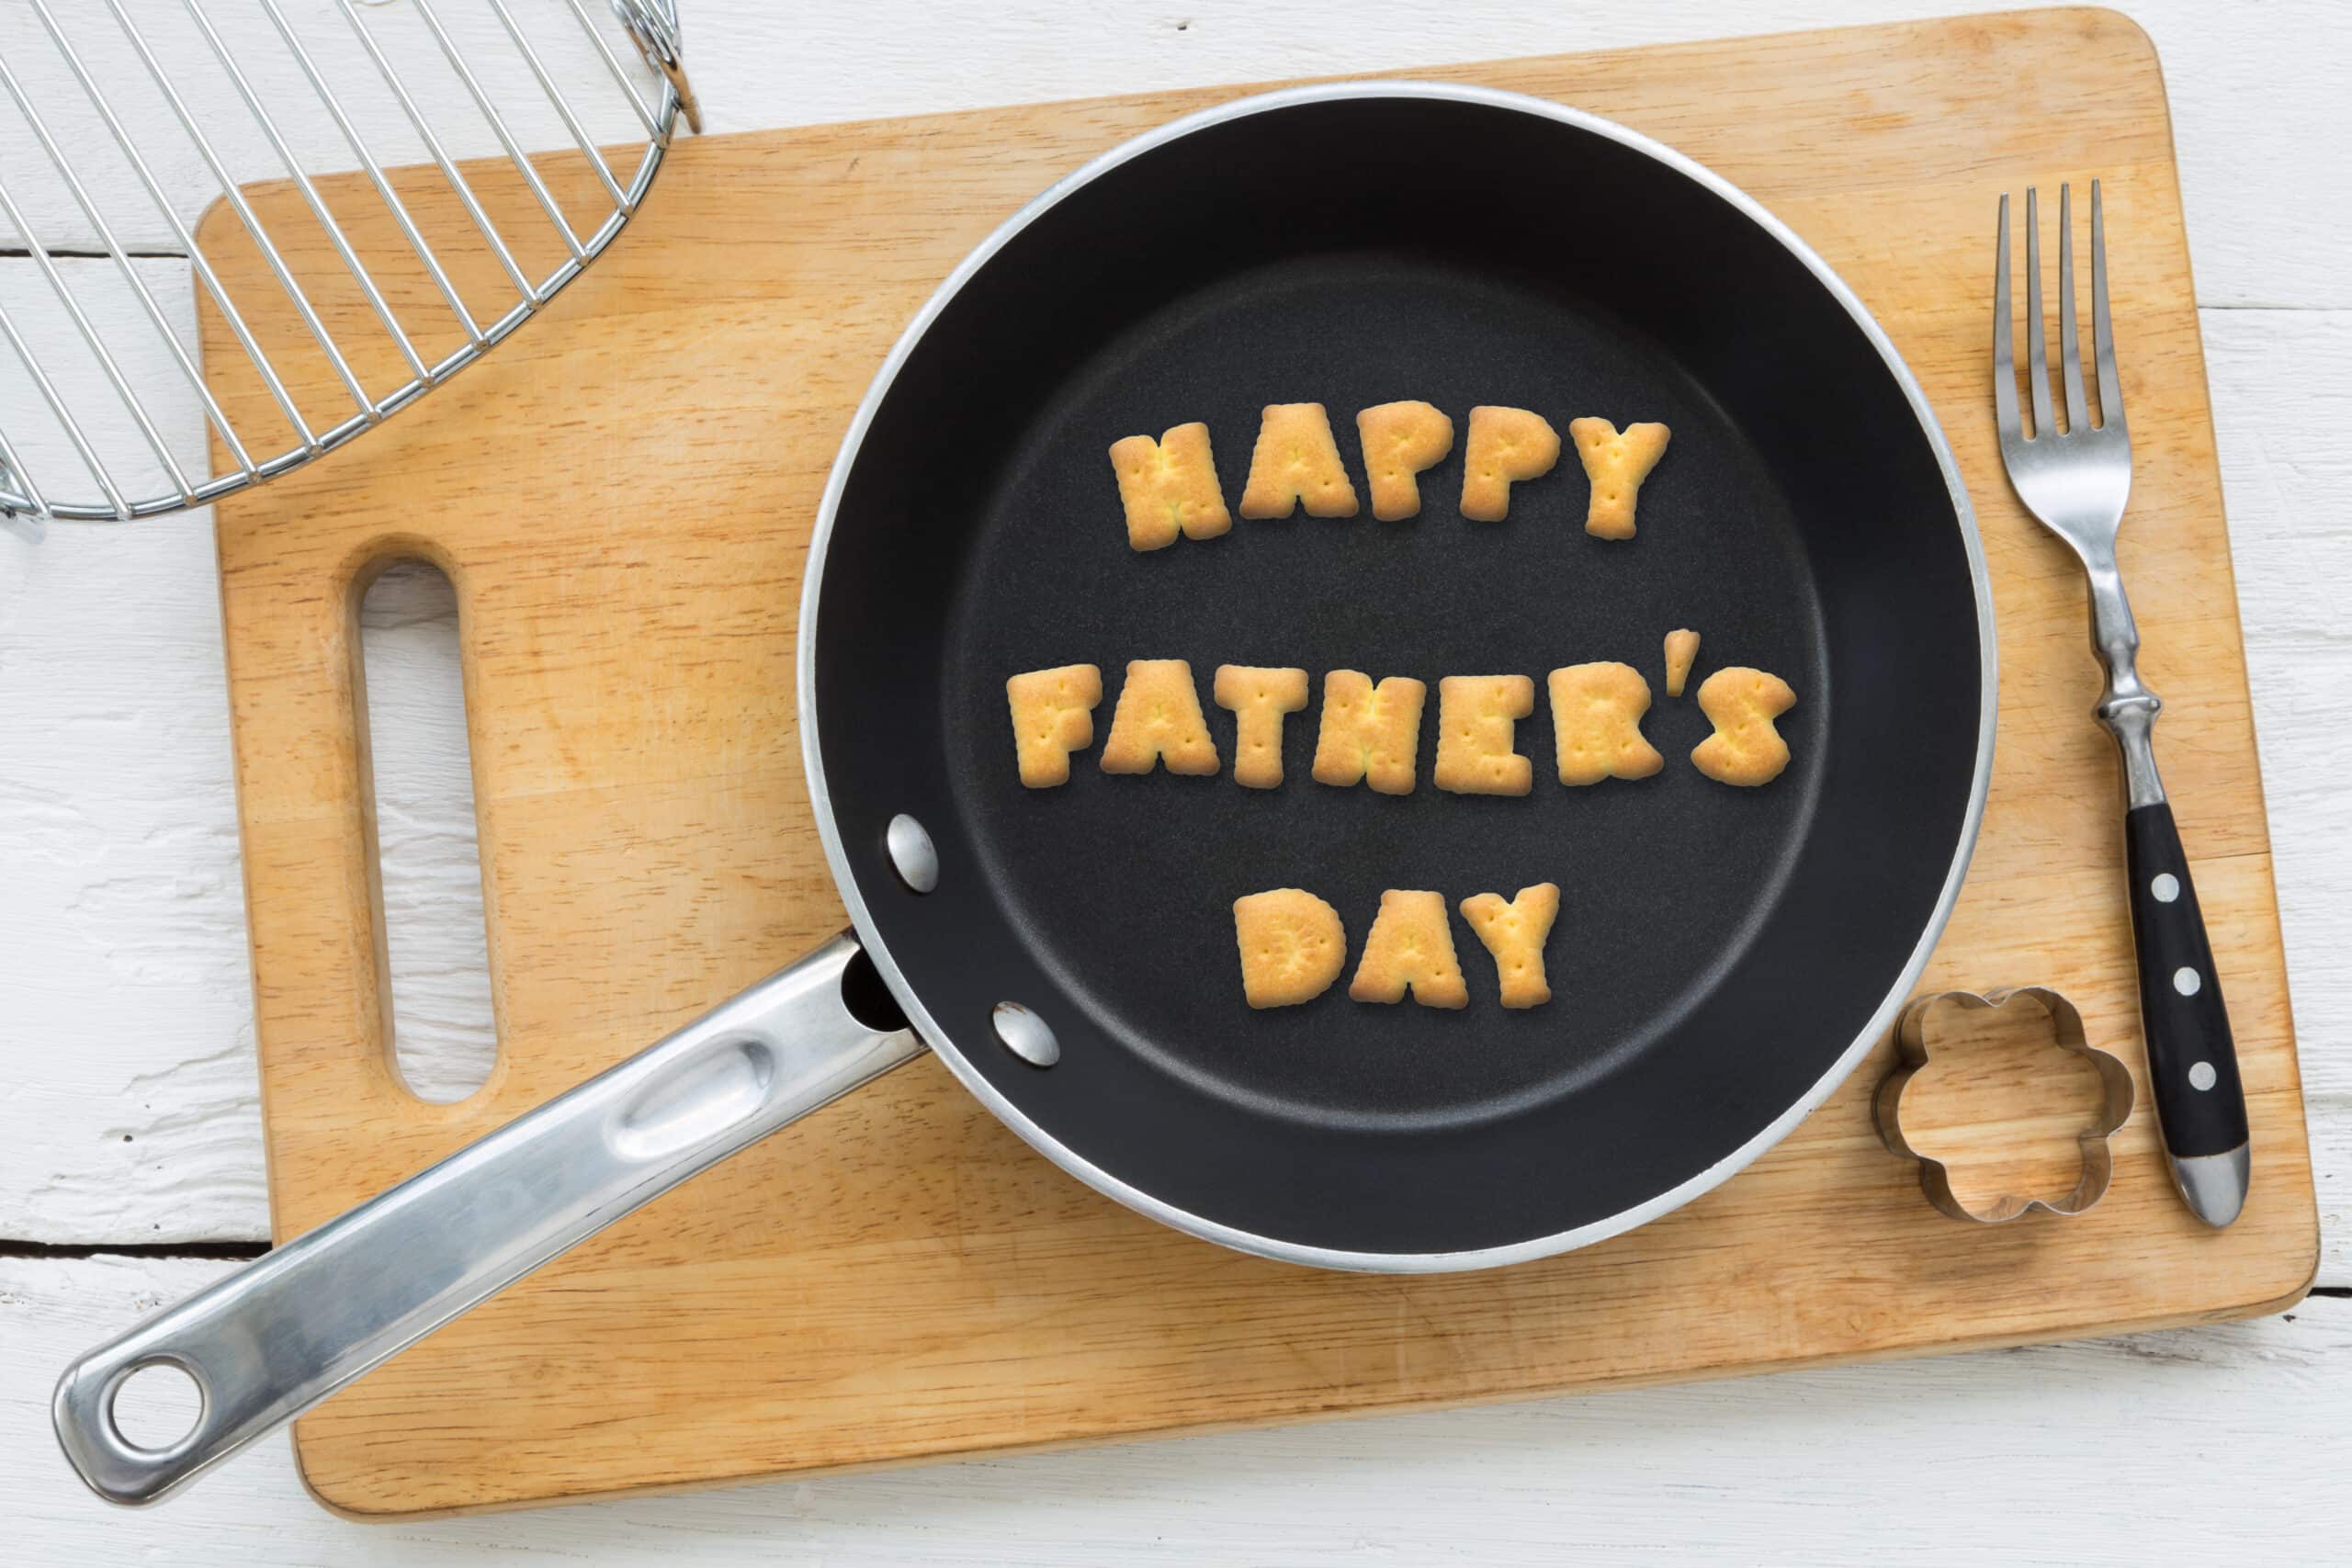 Fantastic Father’s Day Kitchen Gift Ideas